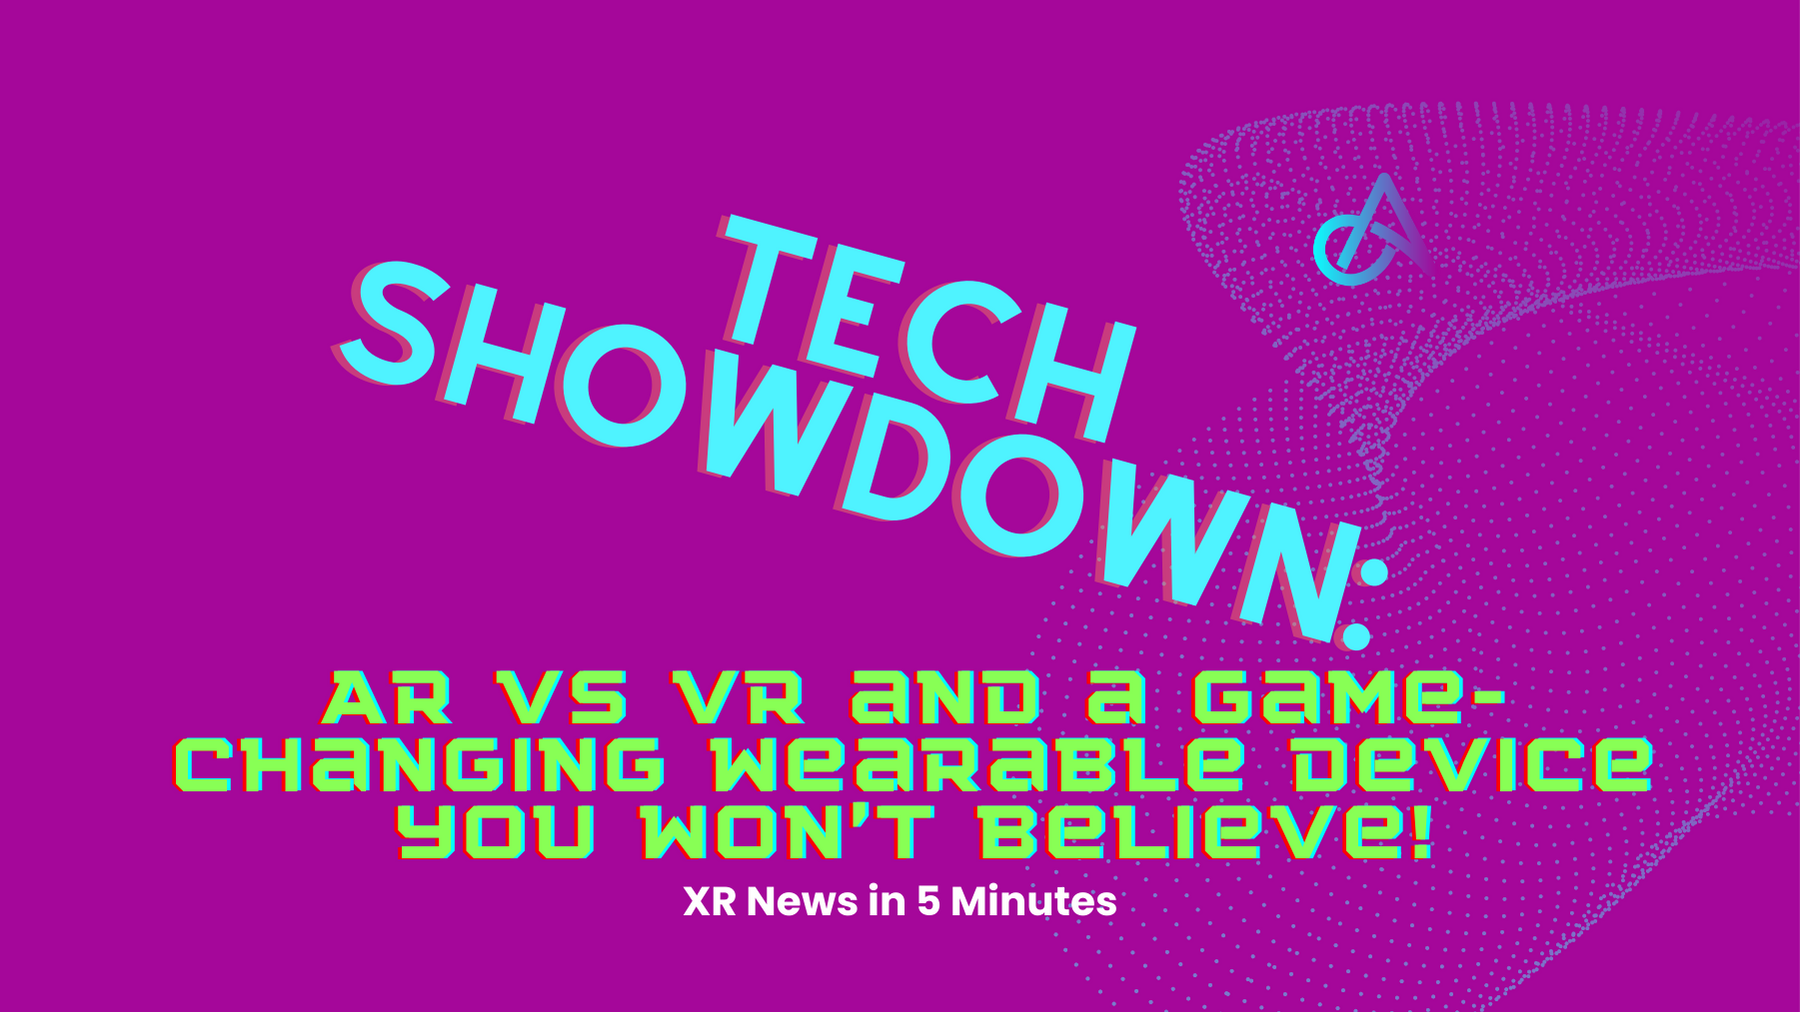 Tech Showdown: AR vs VR and a Game-Changing Wearable Device You Won’t Believe! XR News in 5 Minutes